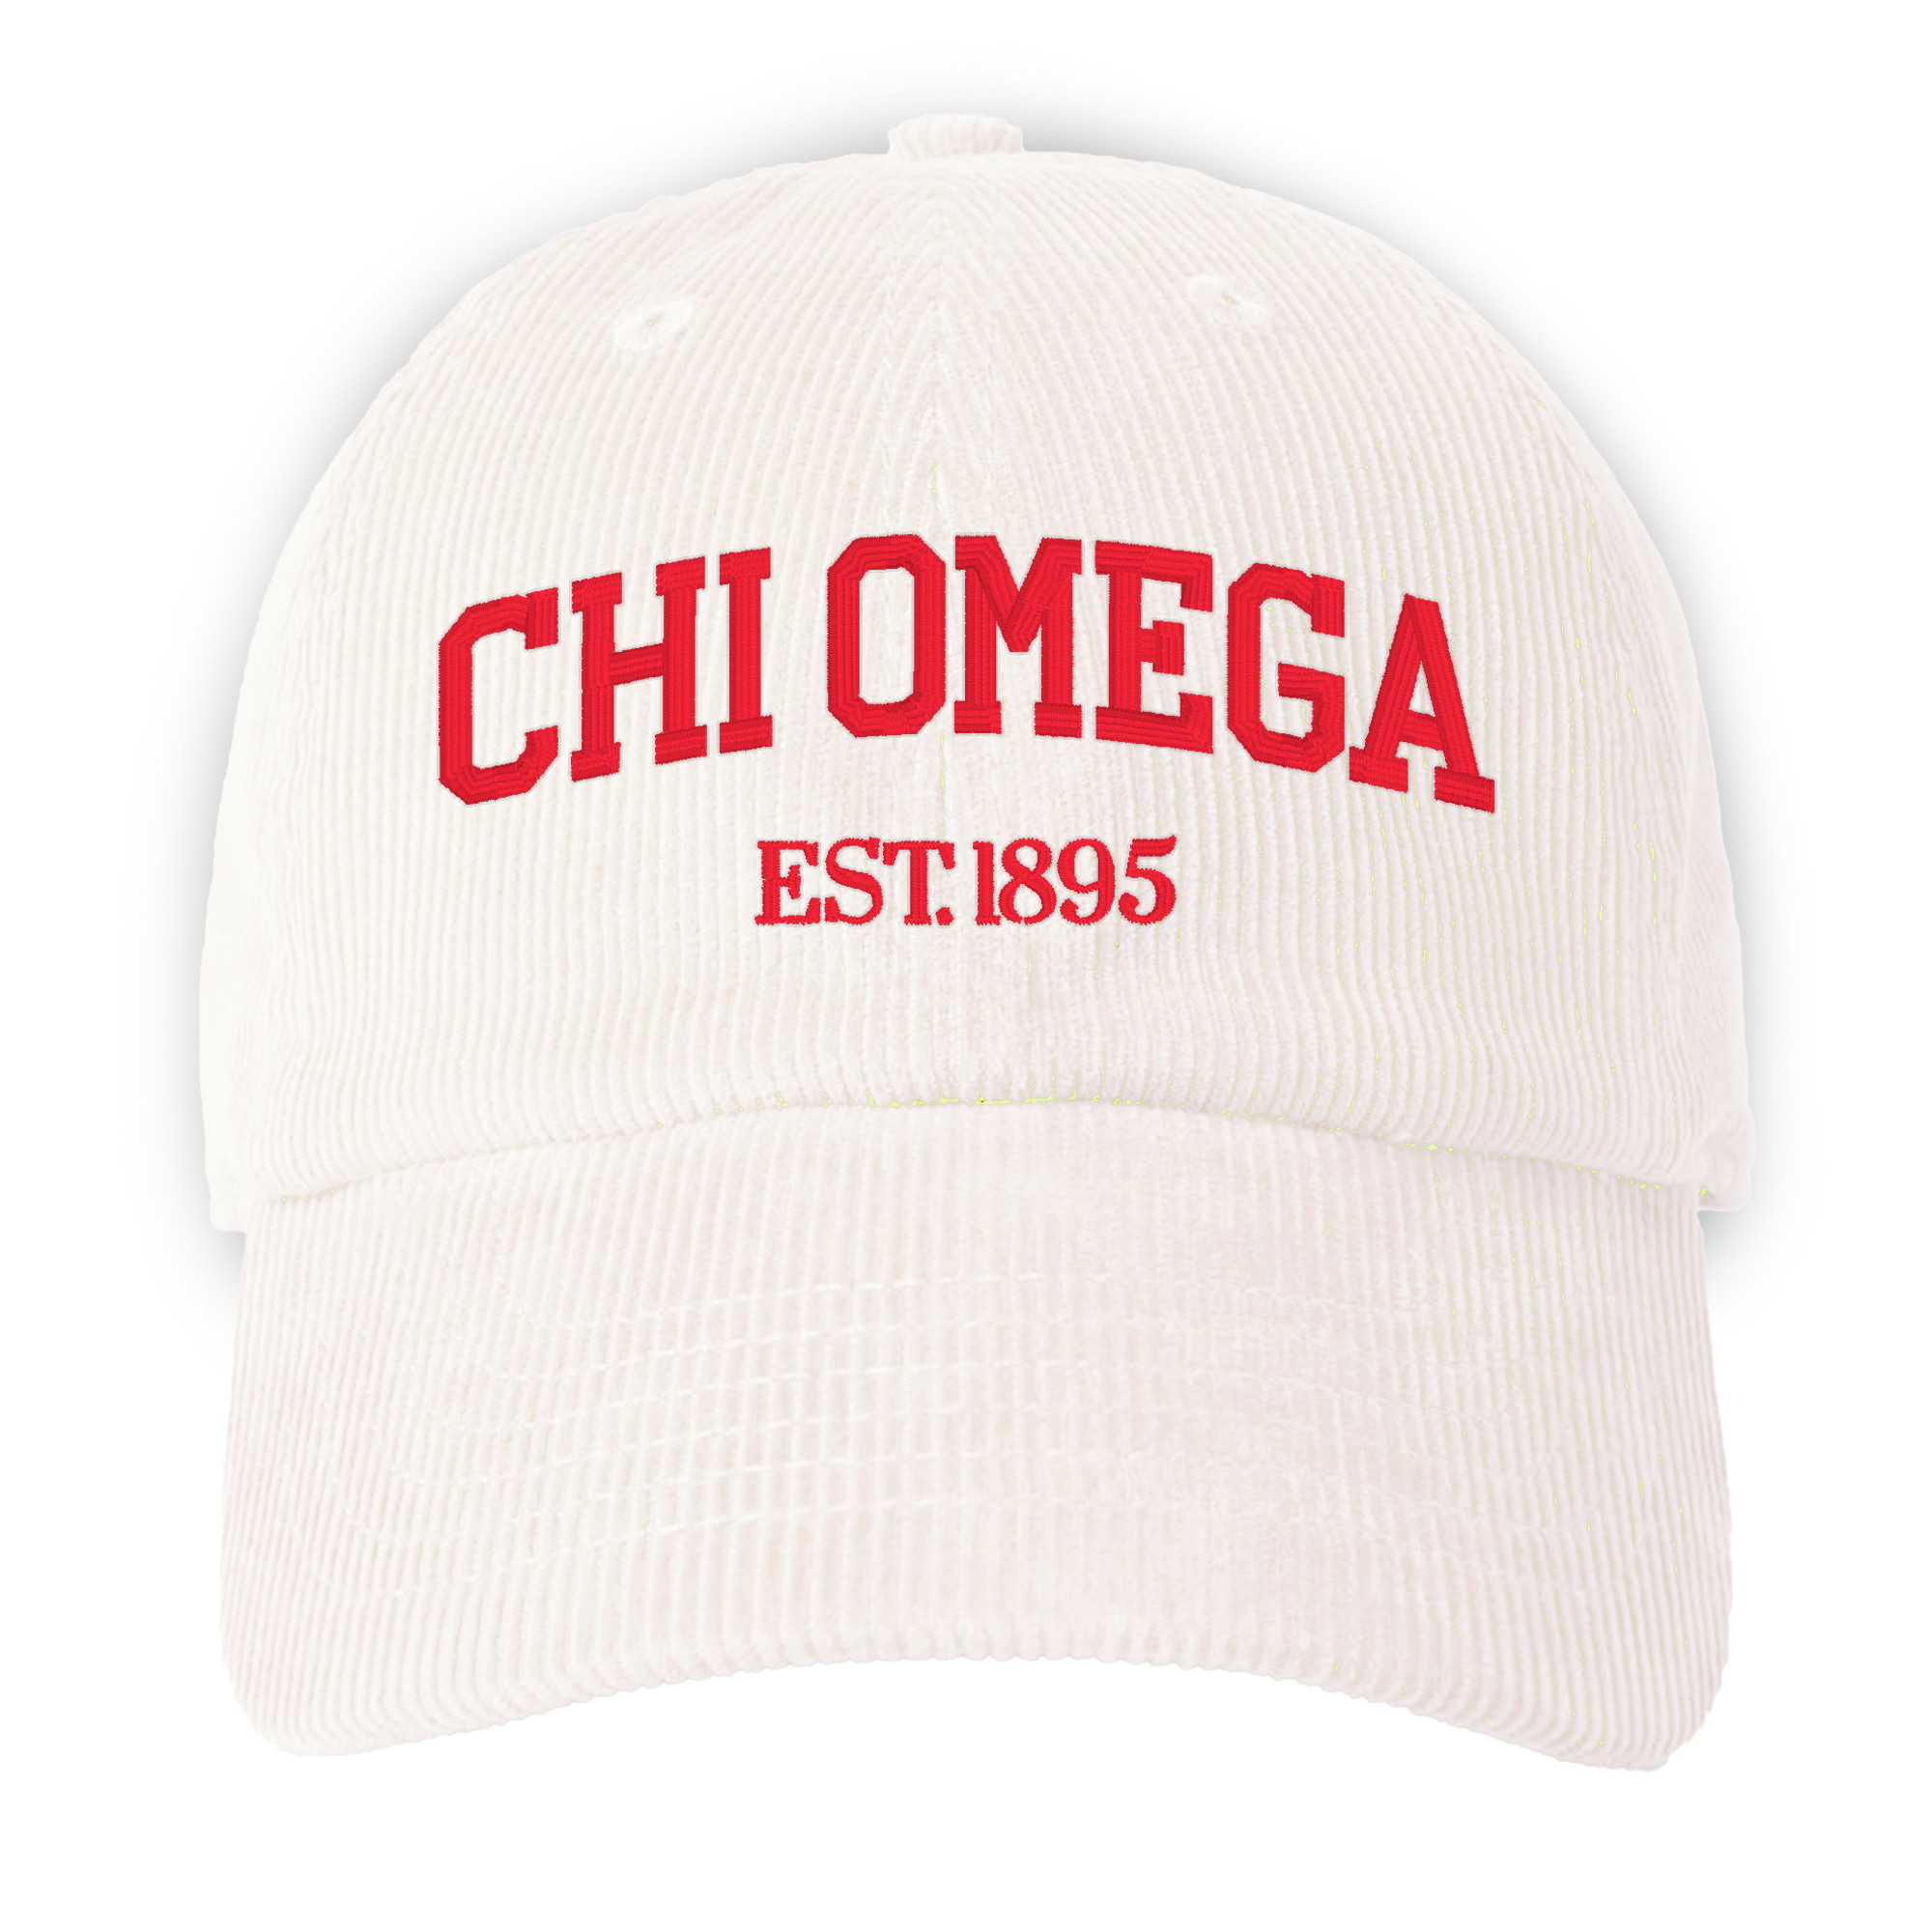 a white hat with the word chi omega on it